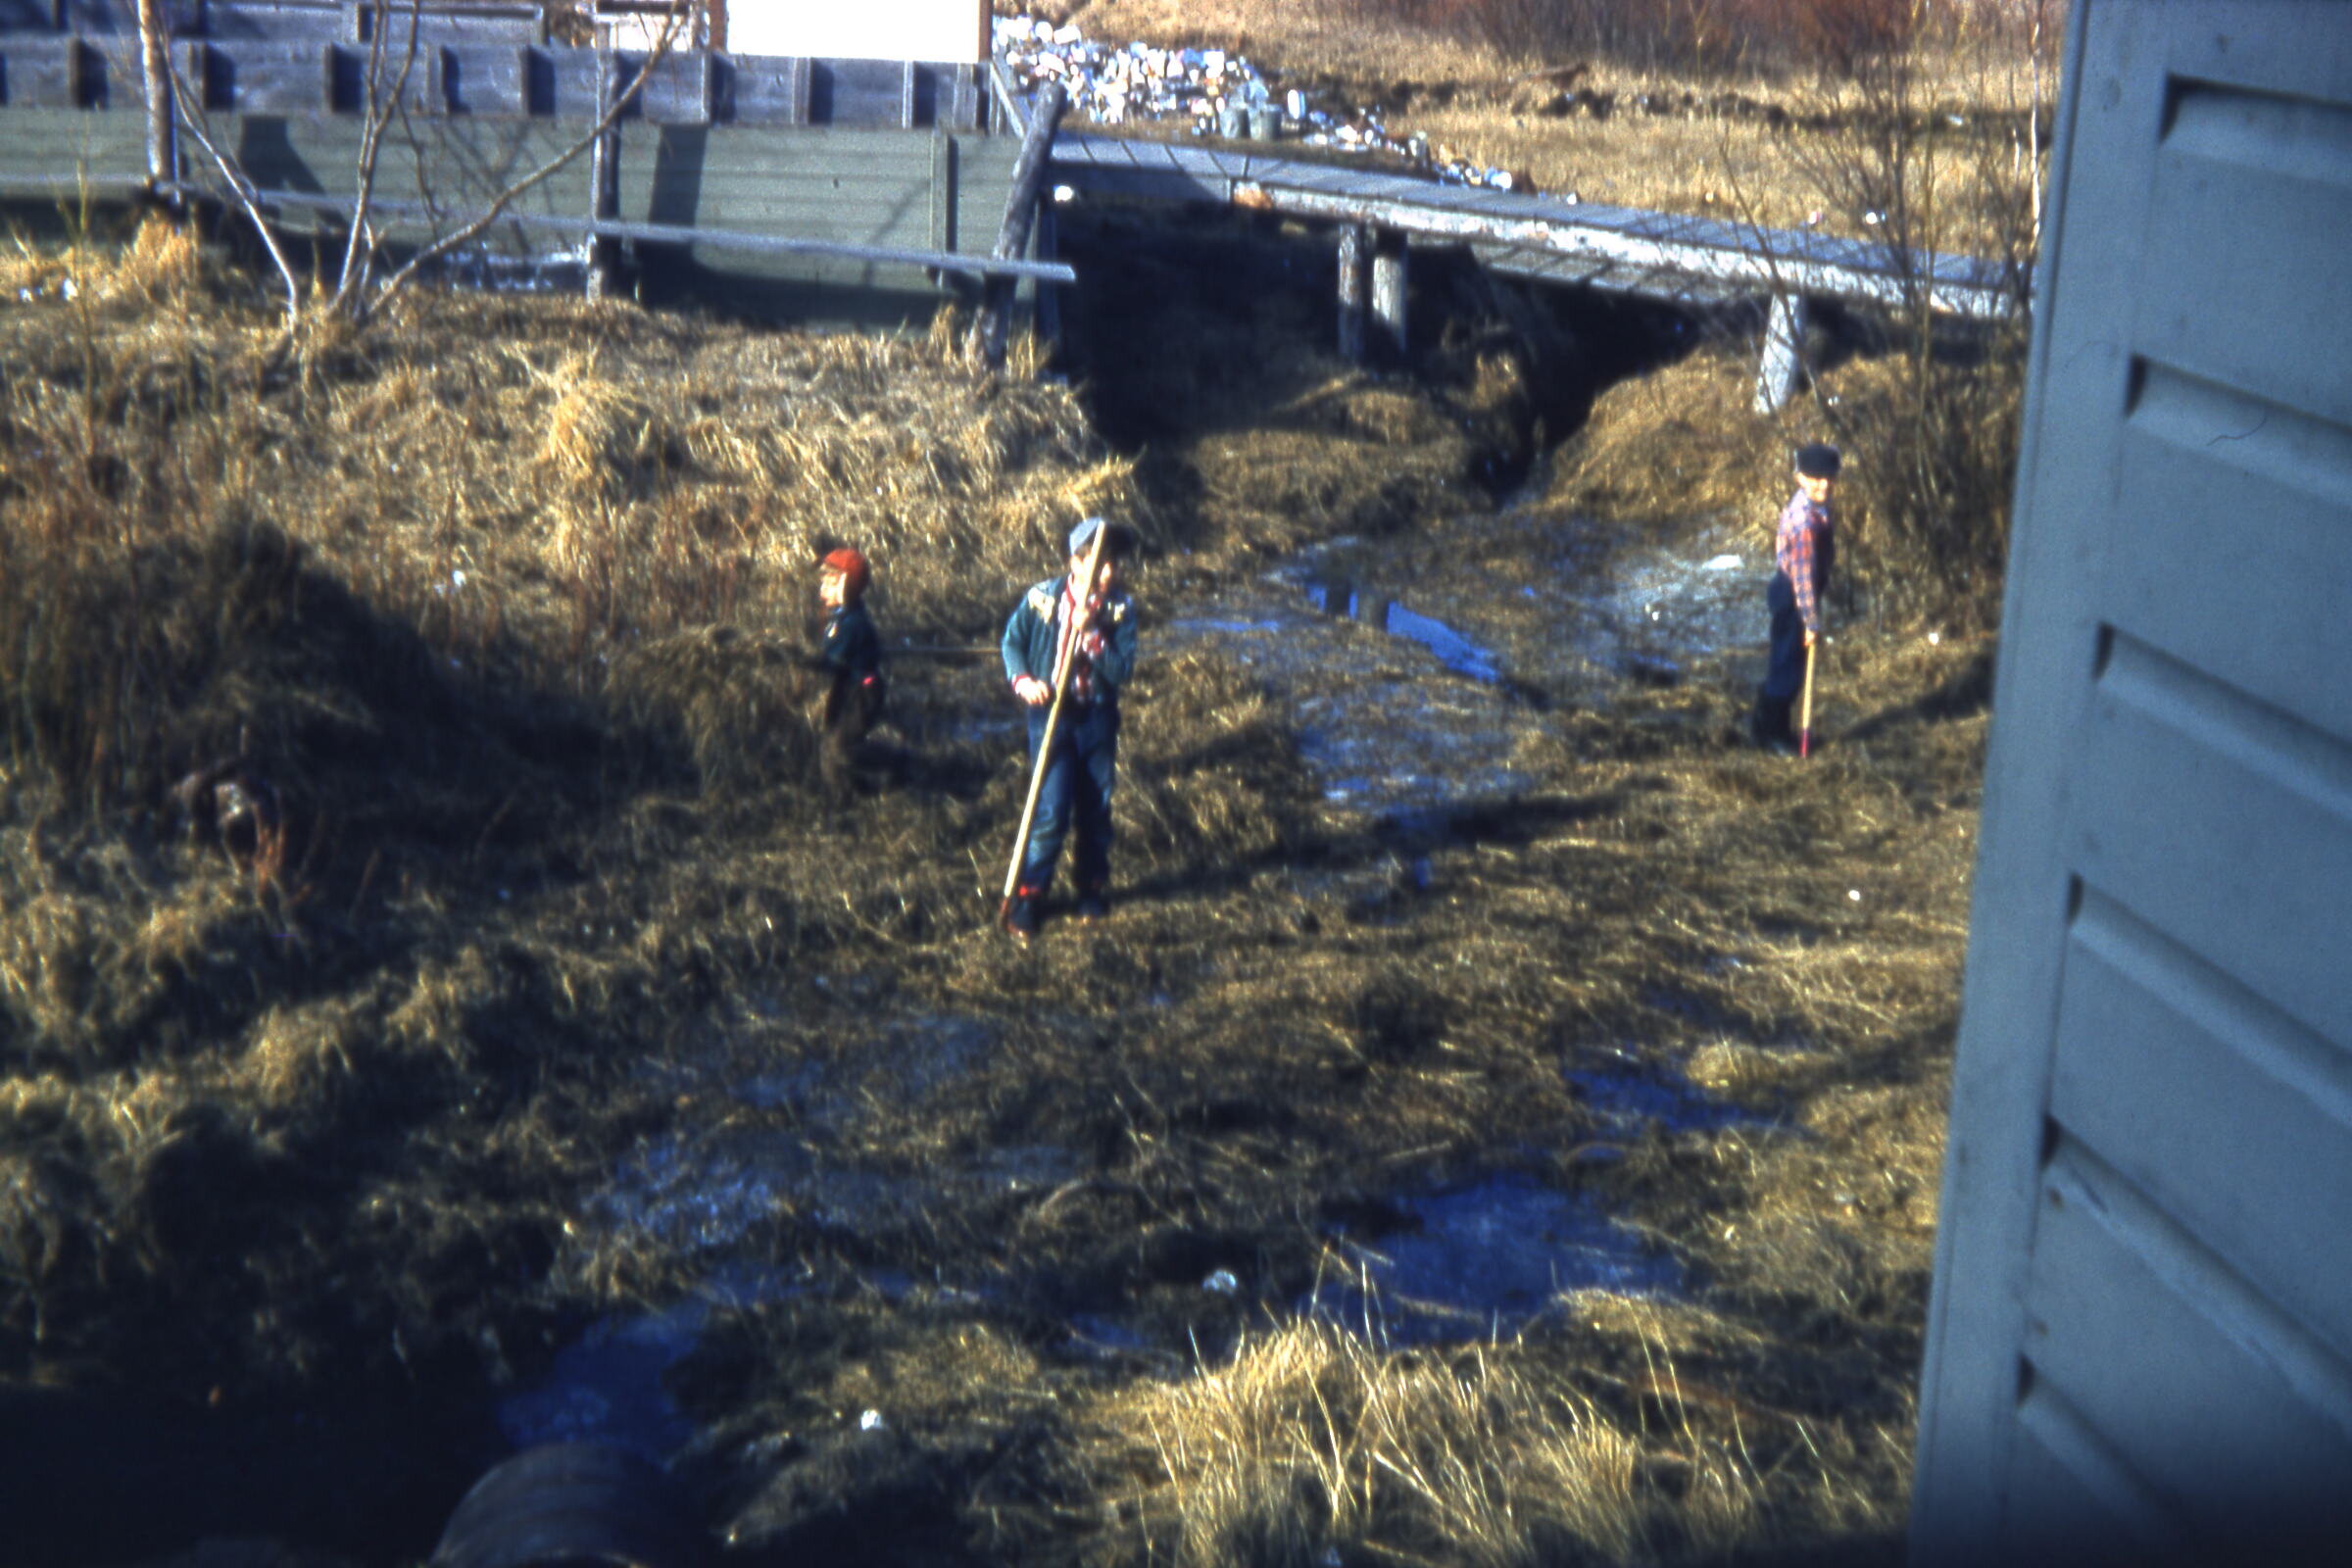 1960 Cleaning the Lagoon.jpg